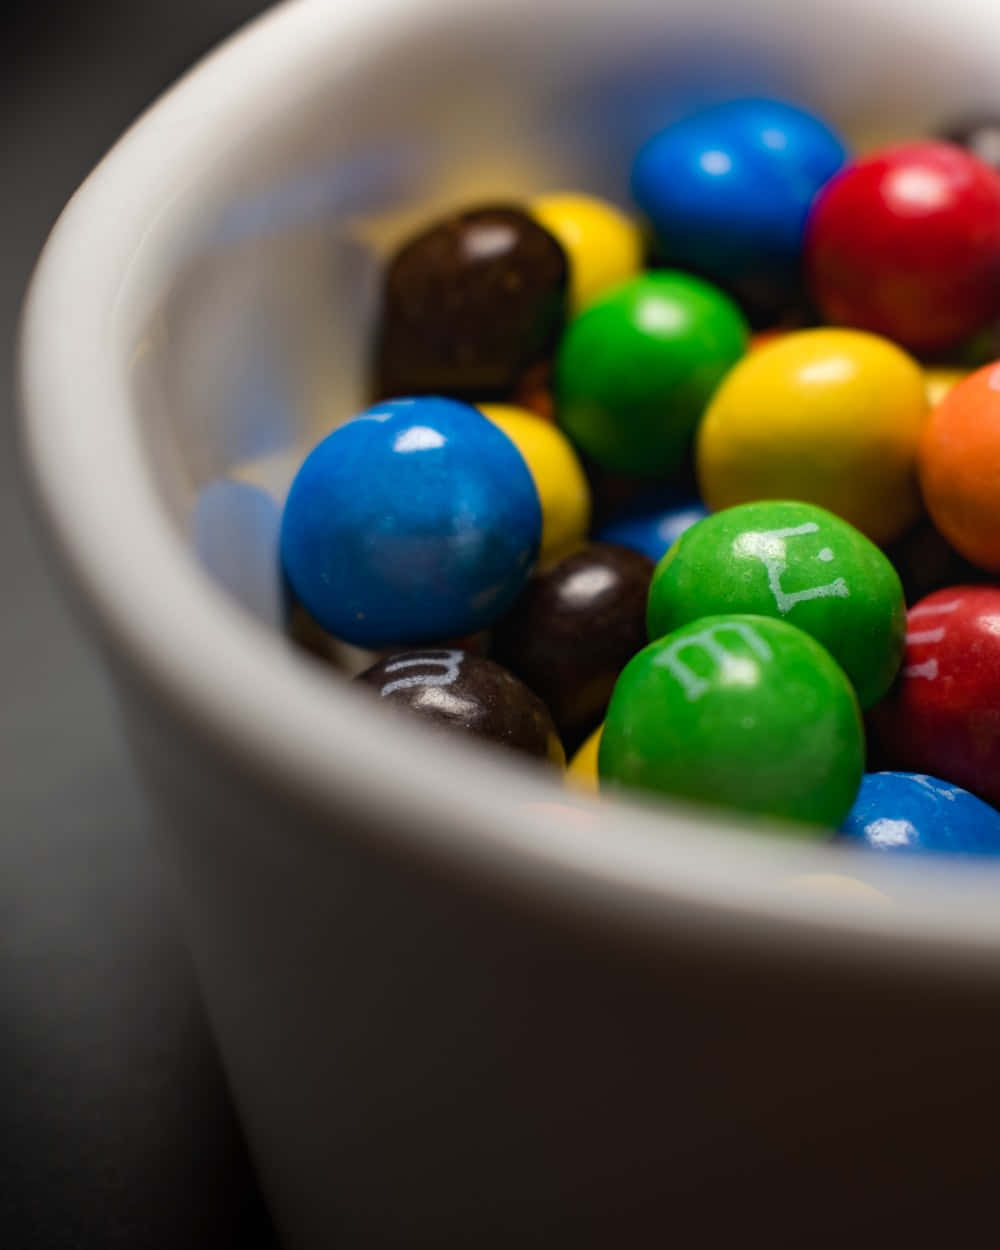 A Bowl Of Colorful M&m's